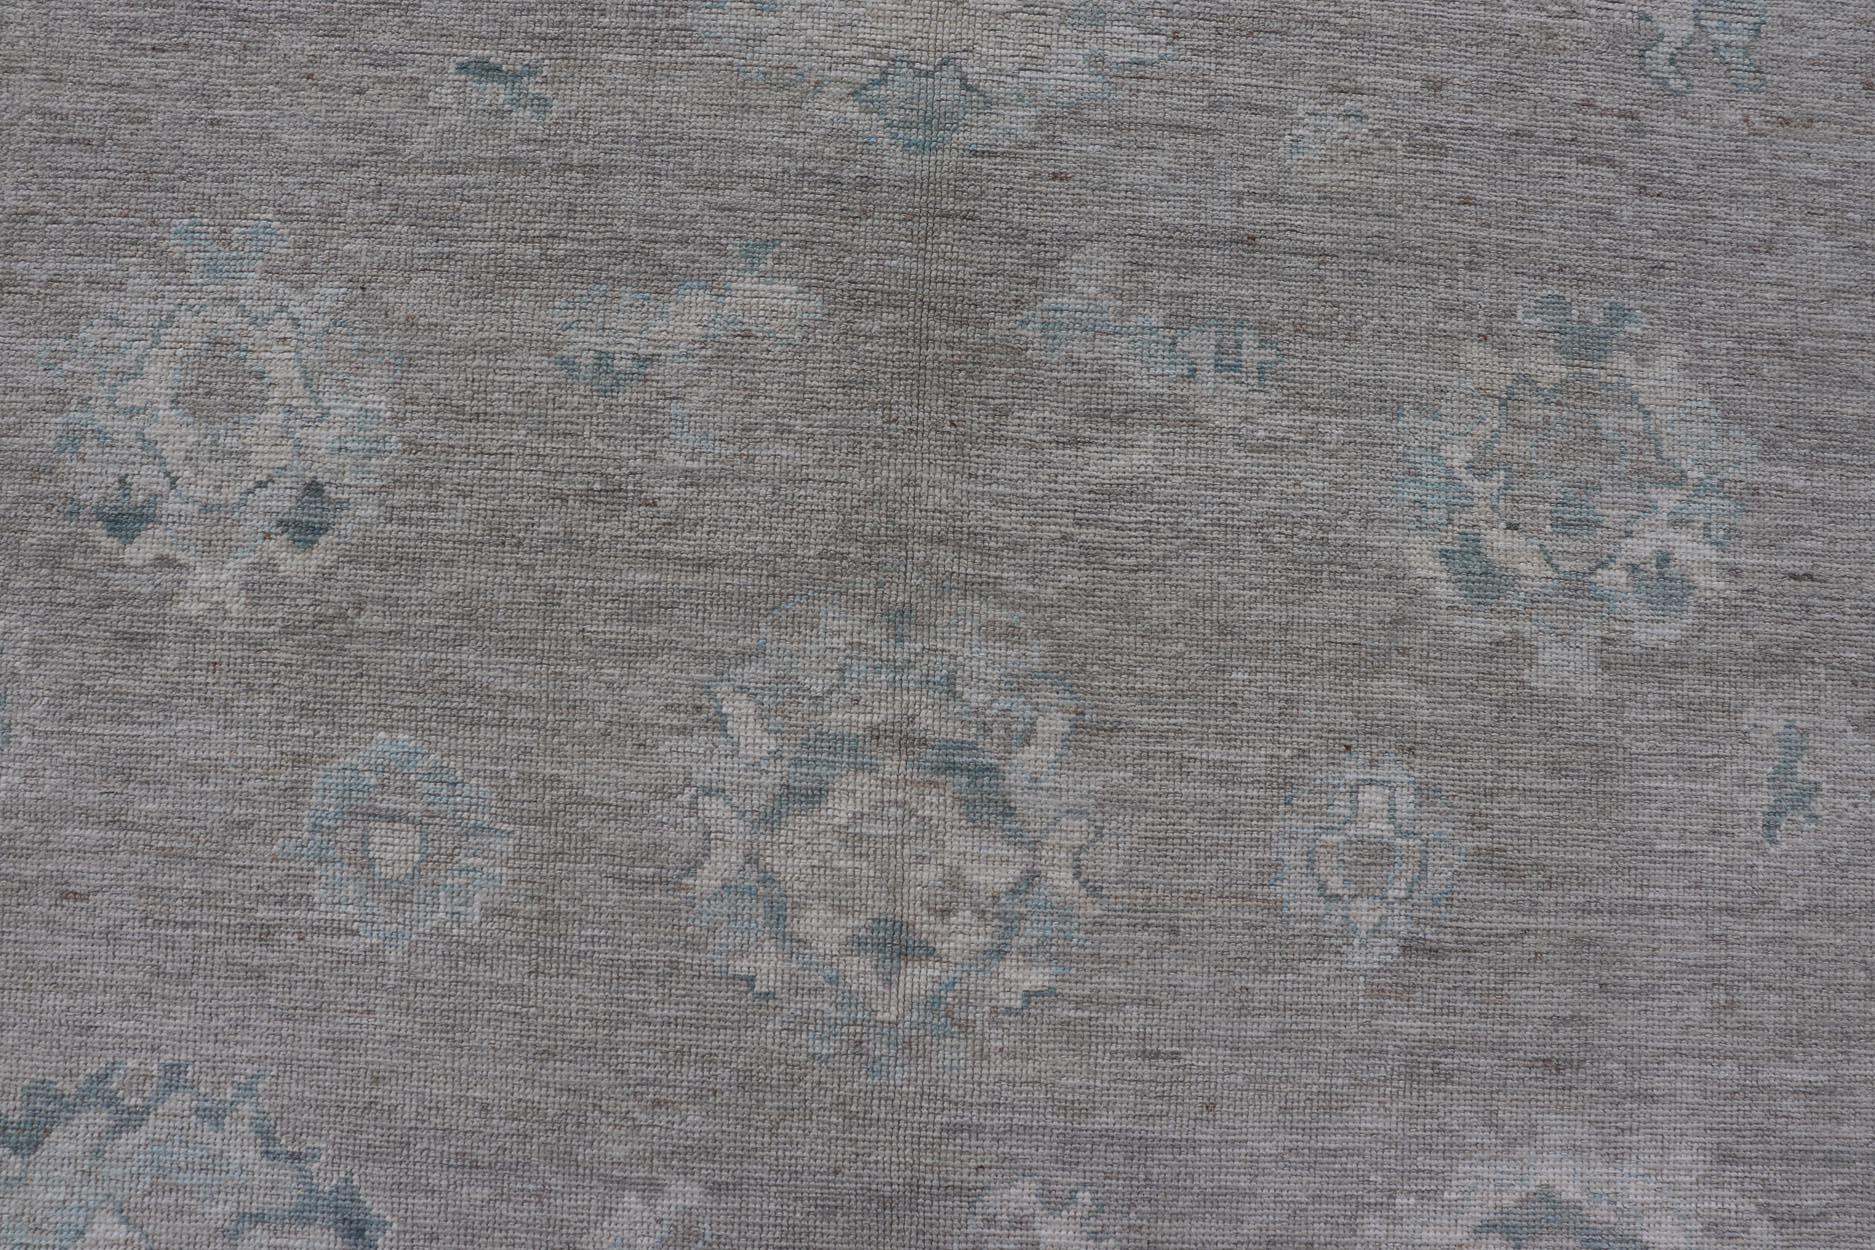 Hand-Knotted Large Modern Oushak with Floral Motifs in Wheat, Mushroom, Grey & Light Blue